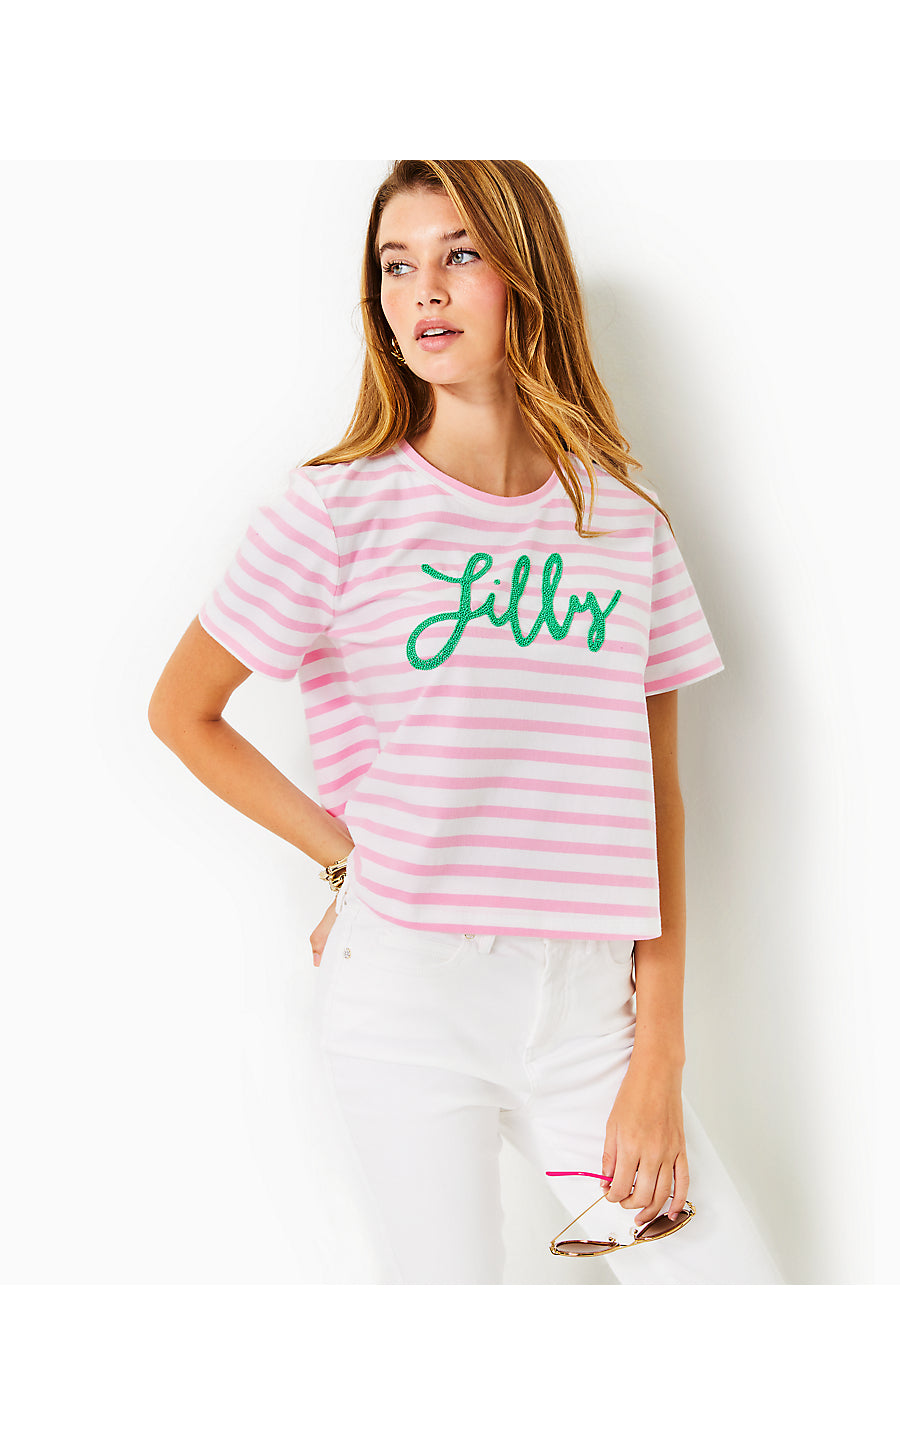 Keenan Knit Top | Conch Shell Pink Striped Lilly Pulitzer Embellished Top